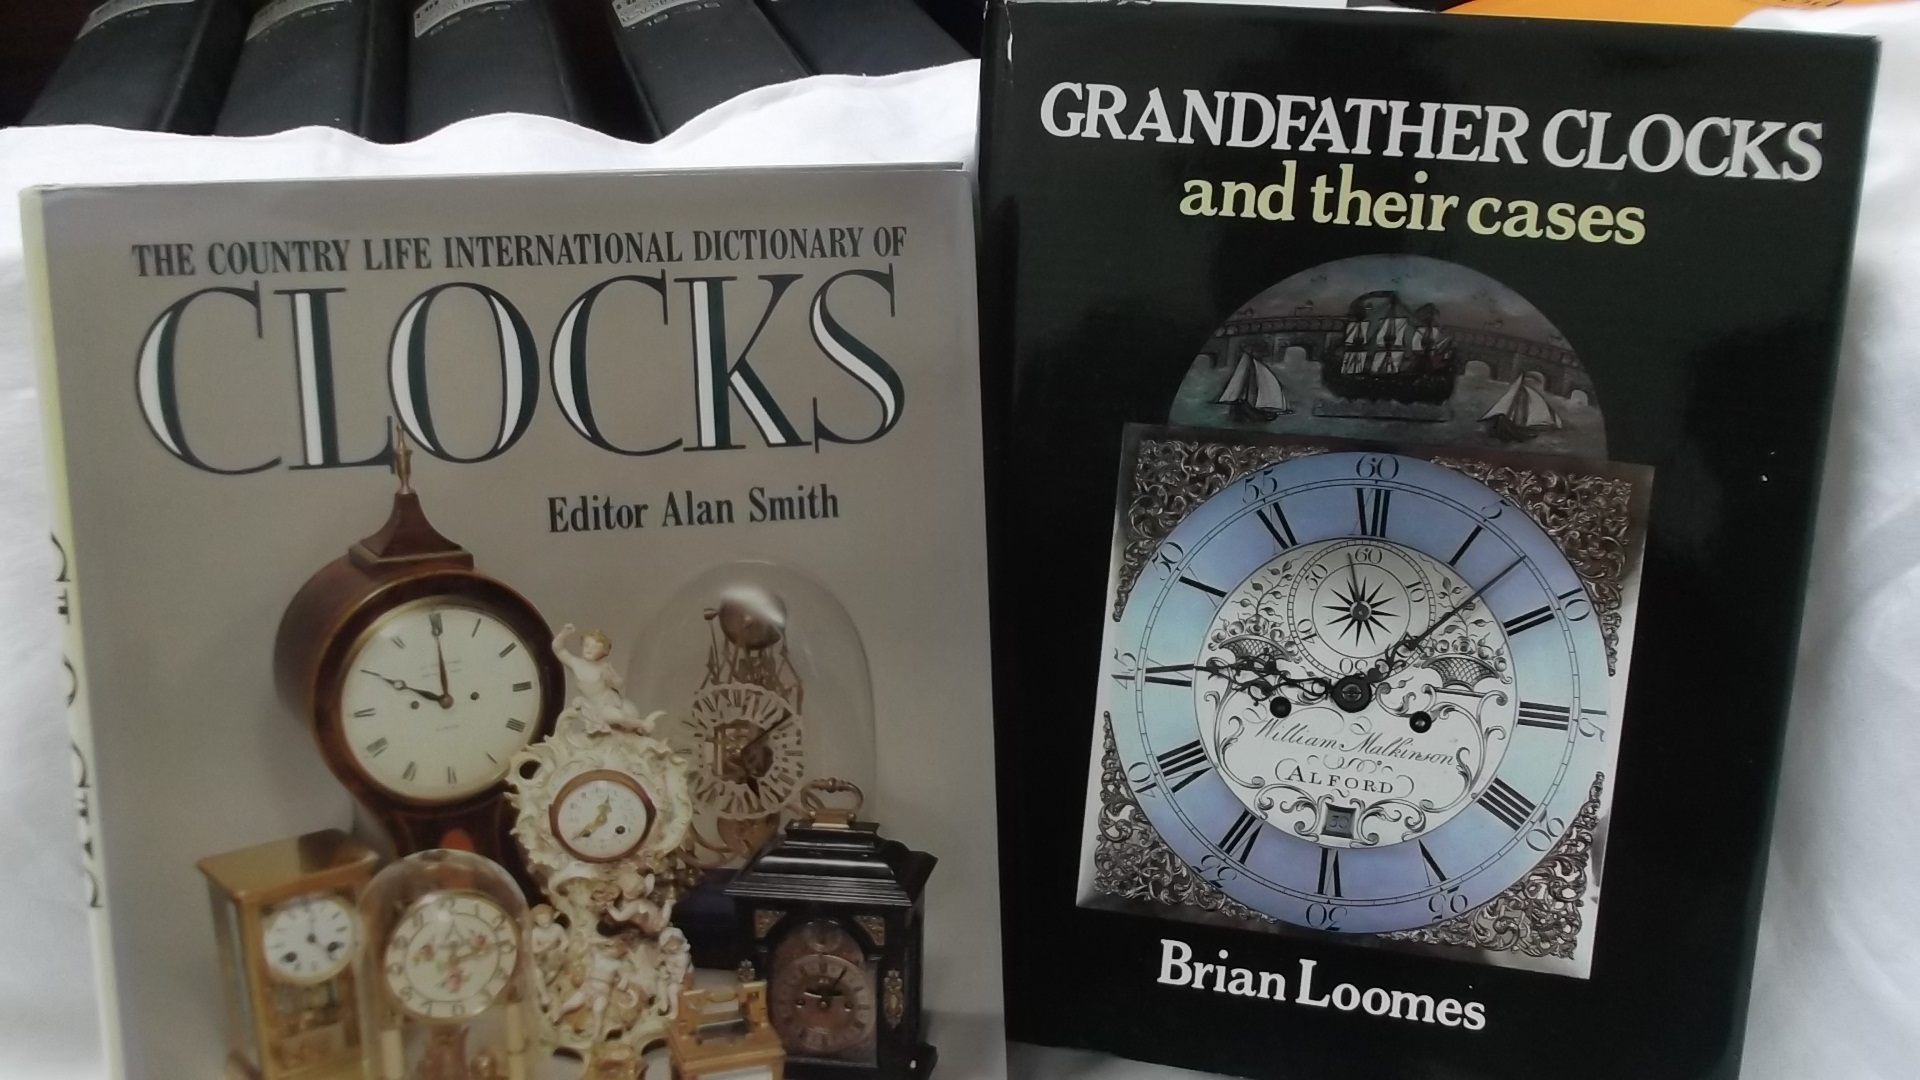 Vol. 'Grandfather Clocks and their Cases' by Brian Loomes and a vol.